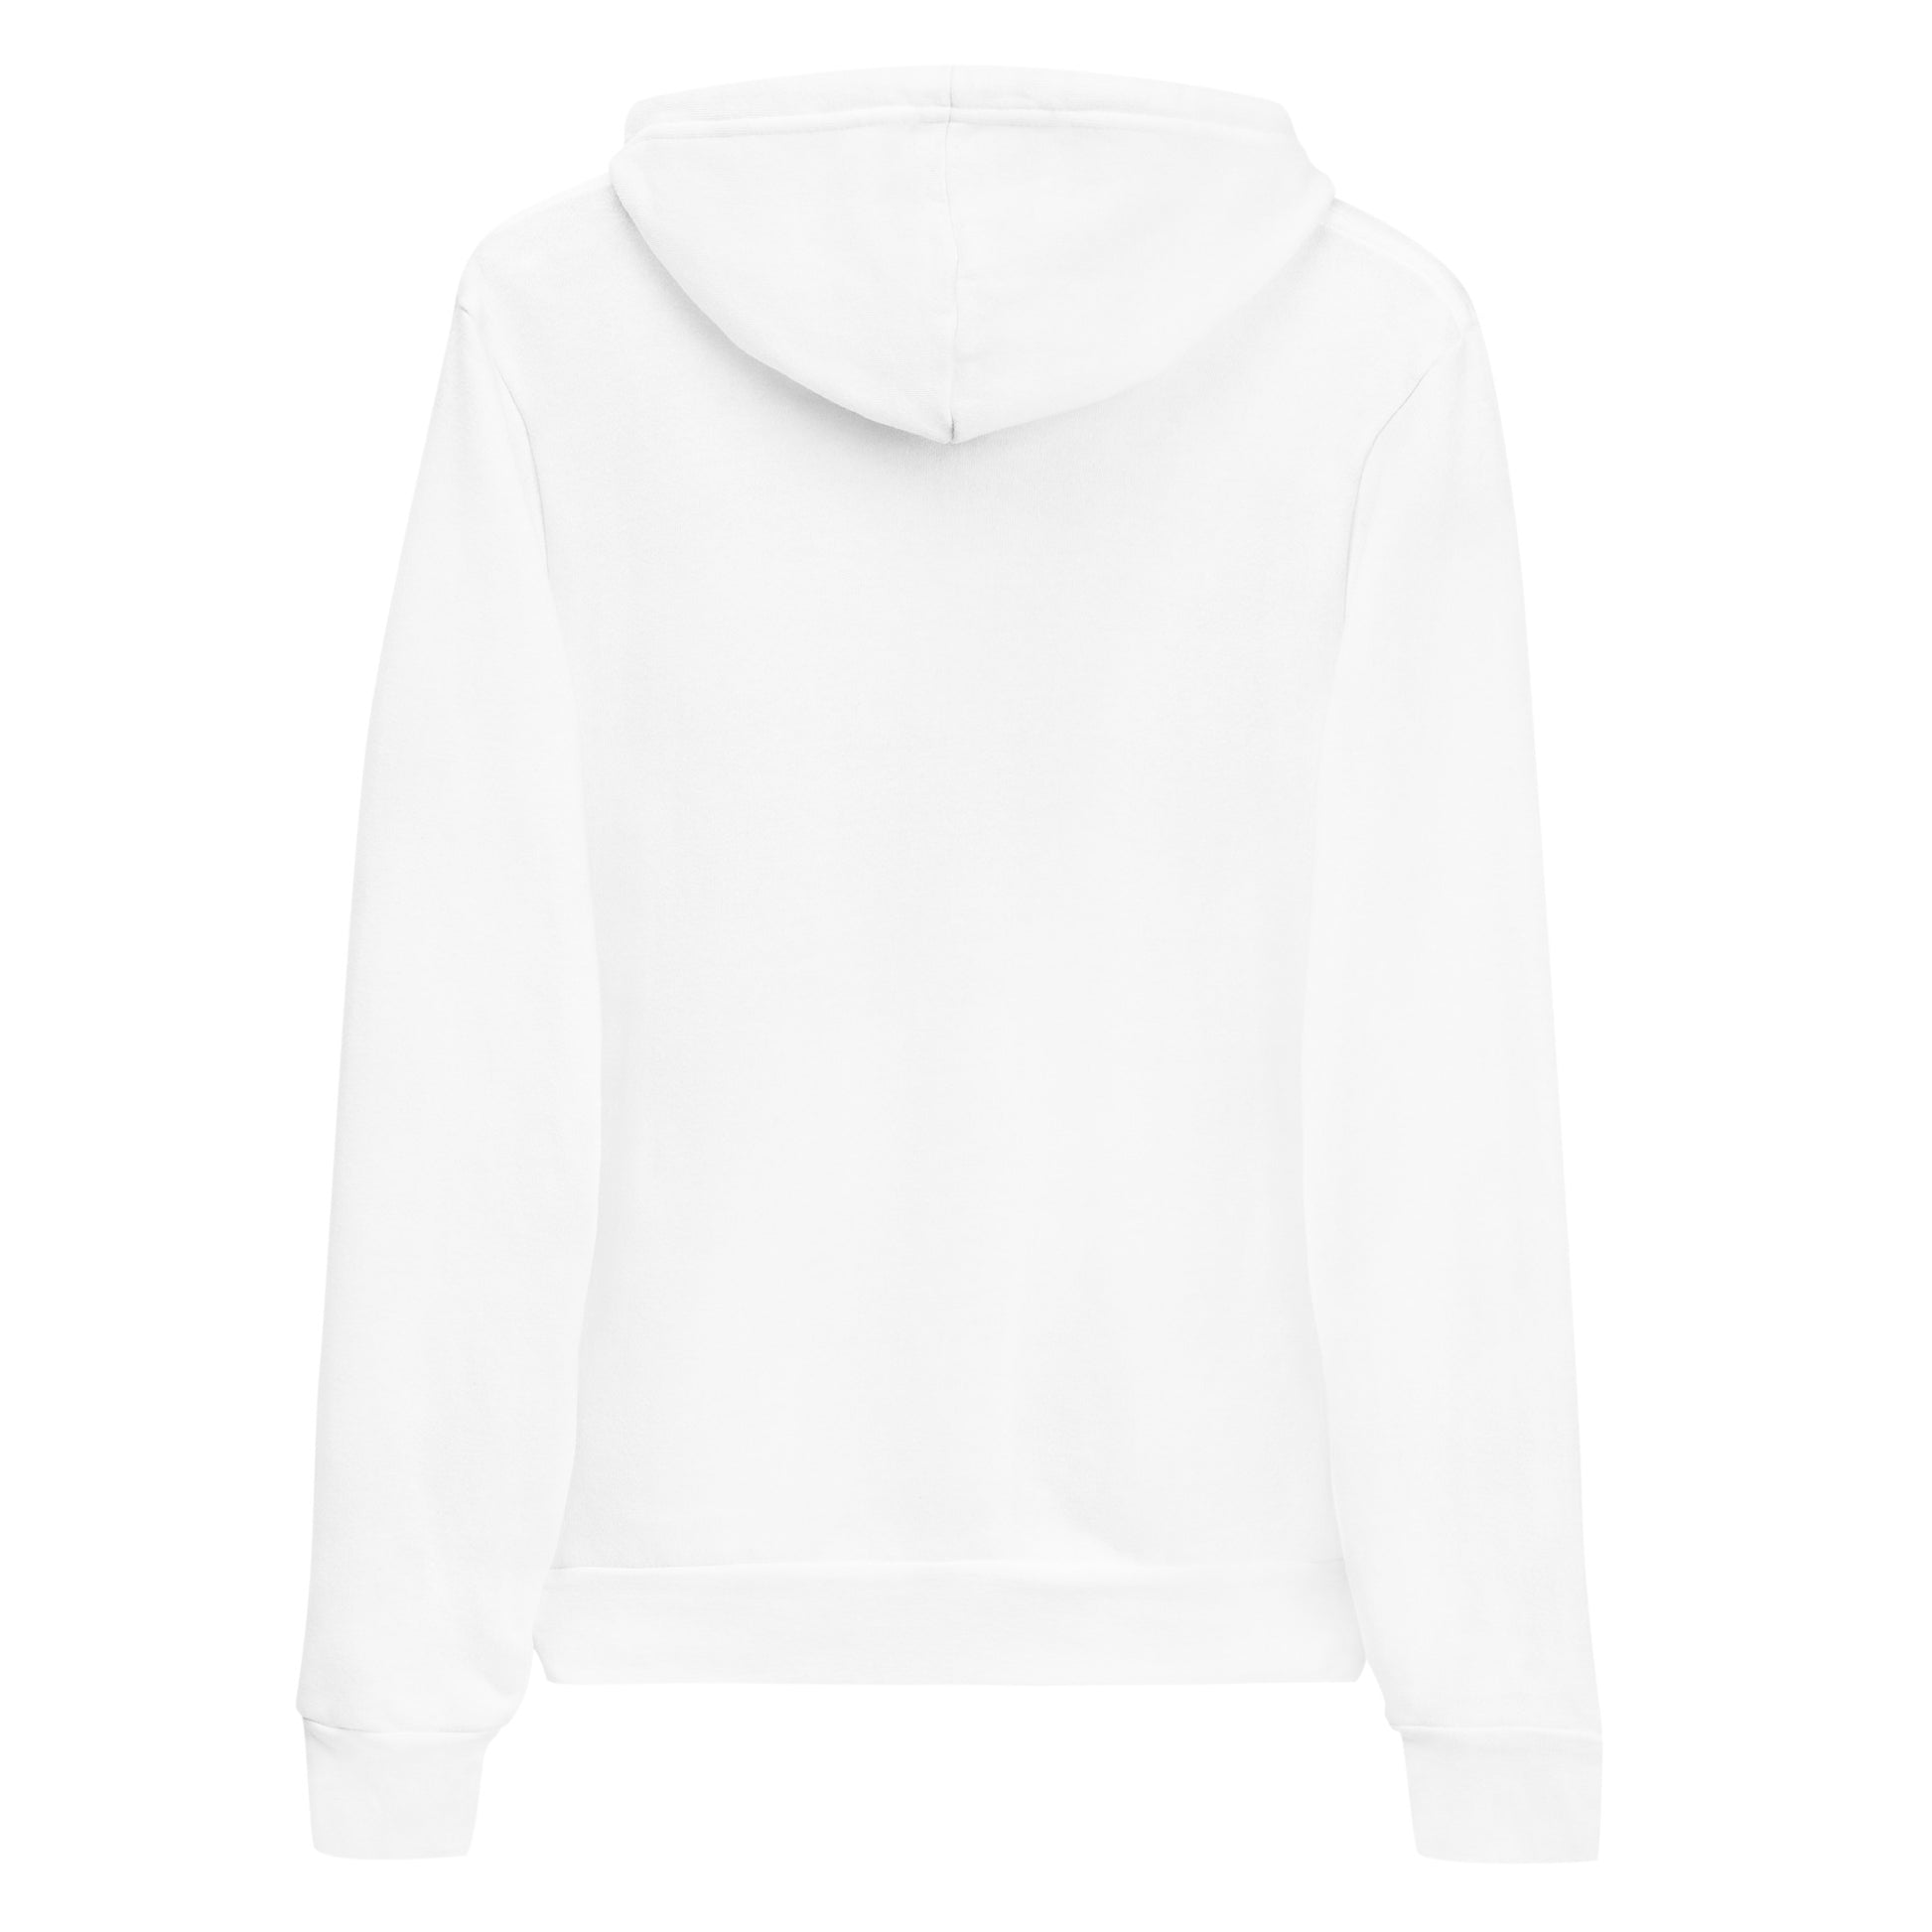 Humble Sportswear, women's cotton fleece active and casual wear runners club hoodie white  